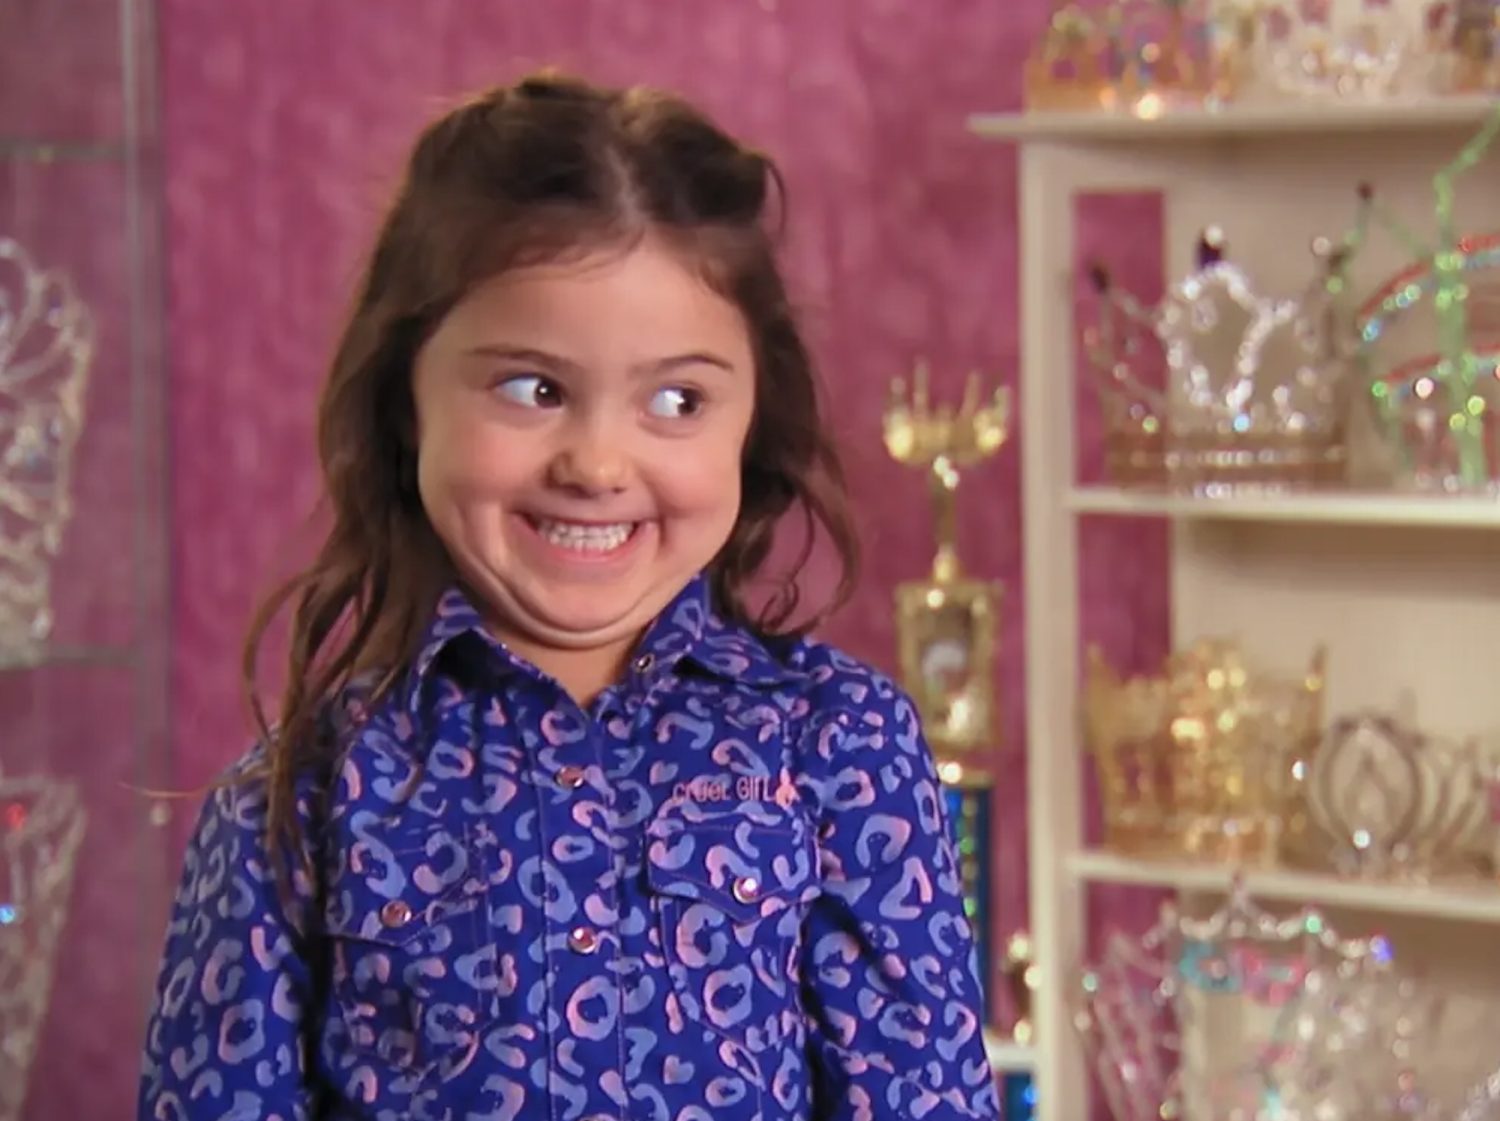 Kailia Posey, "toddlers & Tiaras" Star And Face Of Popular Meme, Has Died At Age 16